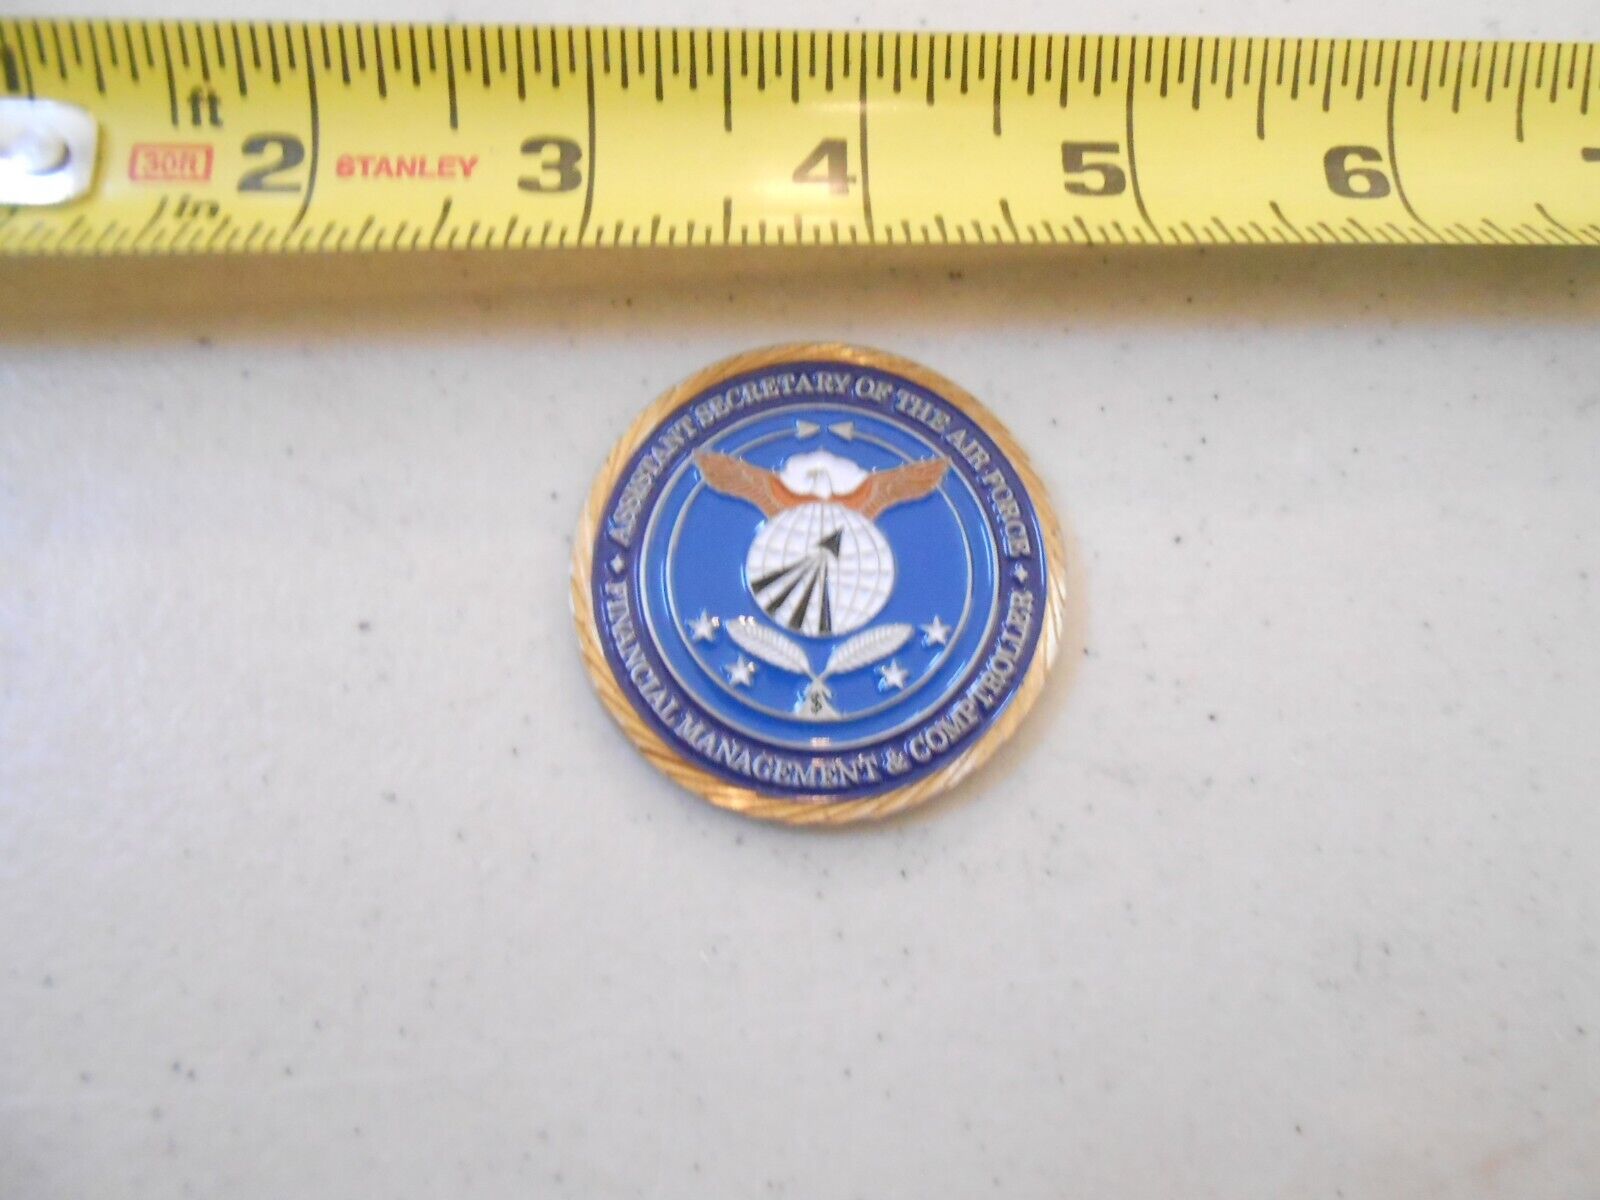 RARE ASST SECRETARY OF THE AIR FORCE FINANCIAL MGT USAF MILITARY CHALLENGE COIN